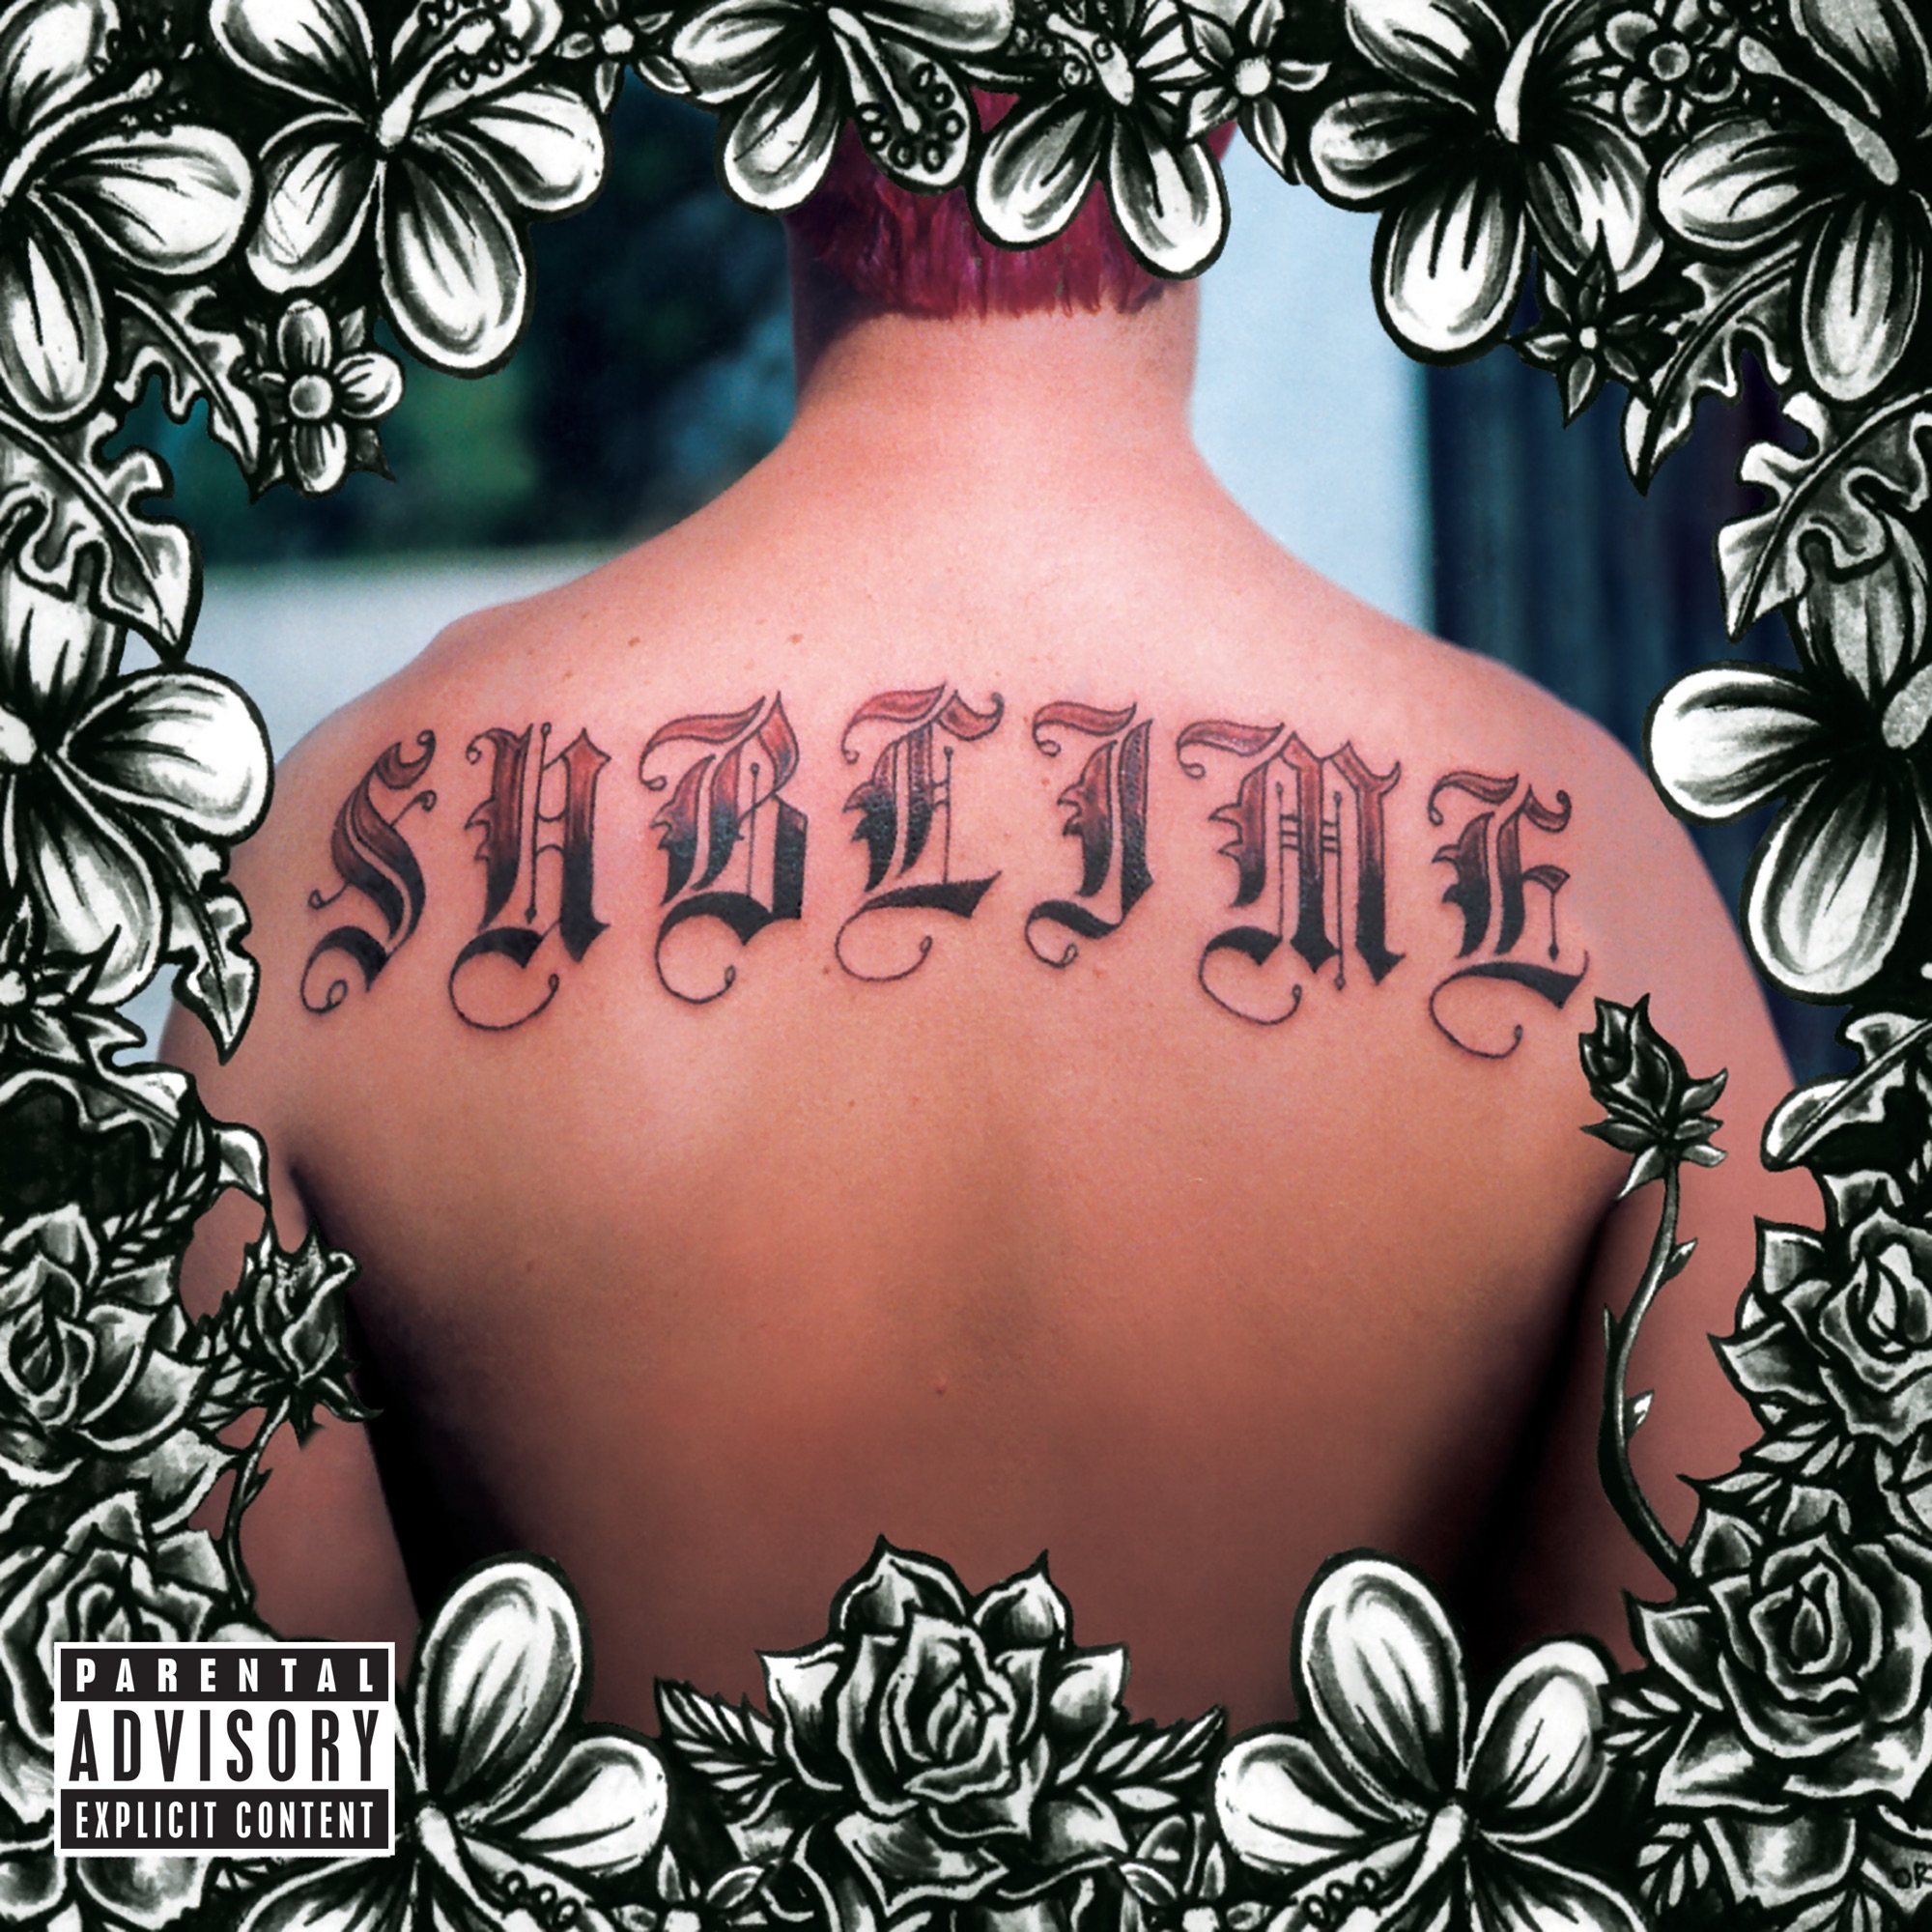 Art for Santeria by Sublime